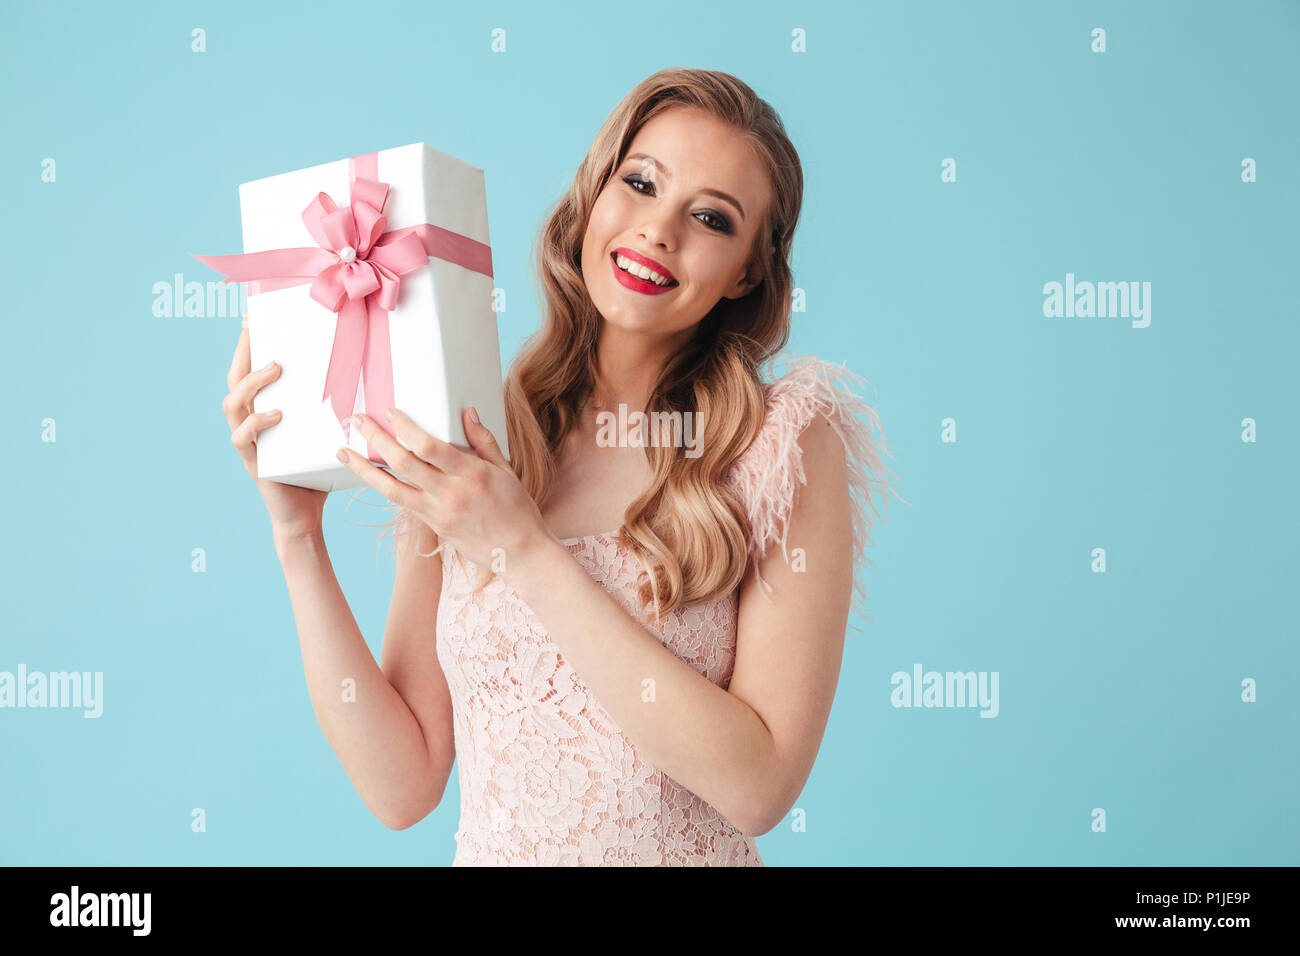 Smiling blonde woman in dress holding gift box and looking at the camera ovr turquoise background Stock Photo